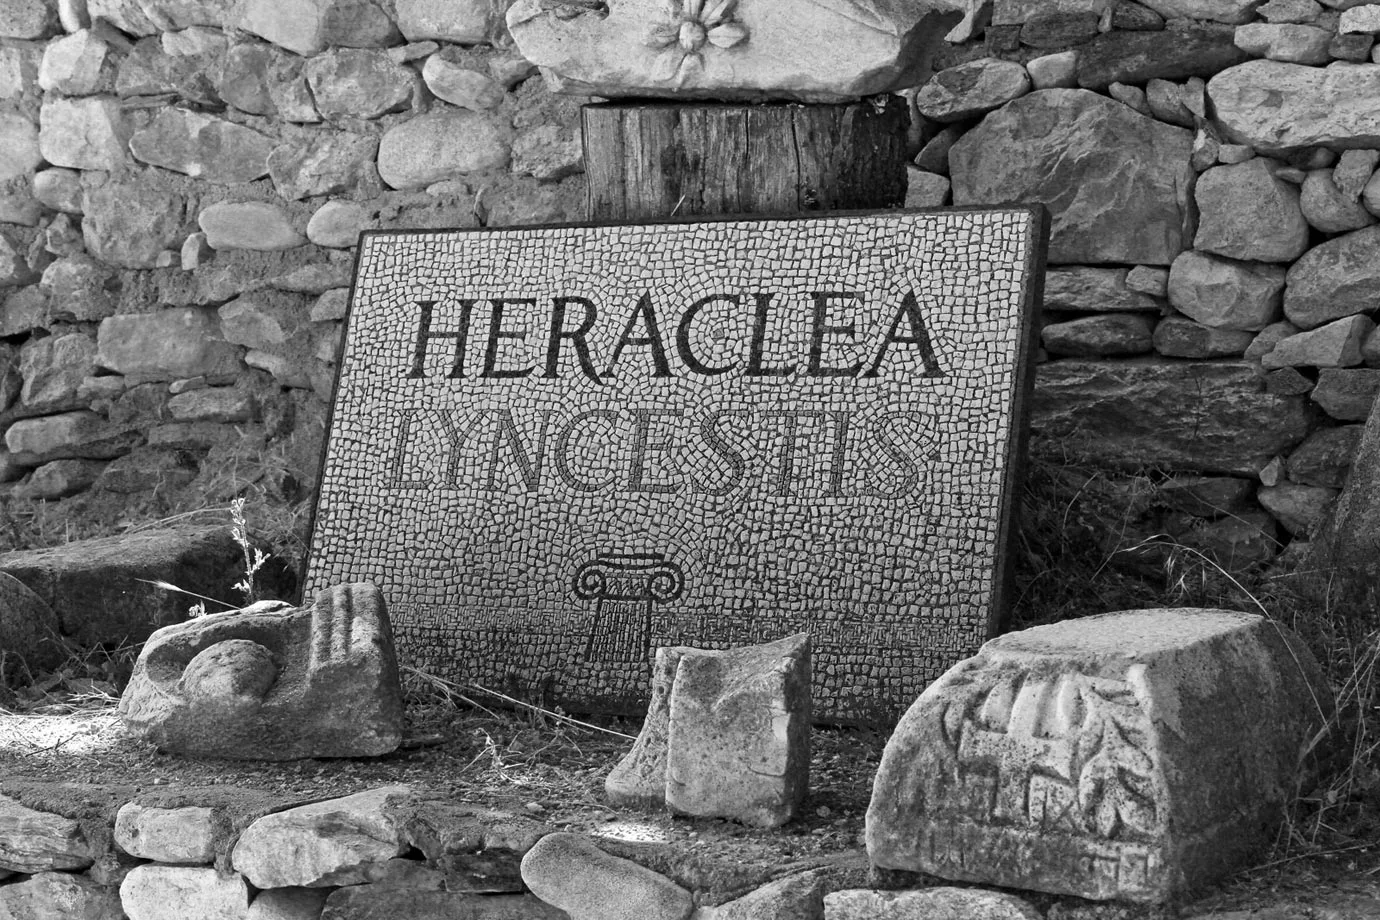 Heraclea Lyncestis is 2km south of Bitola in Macedonia